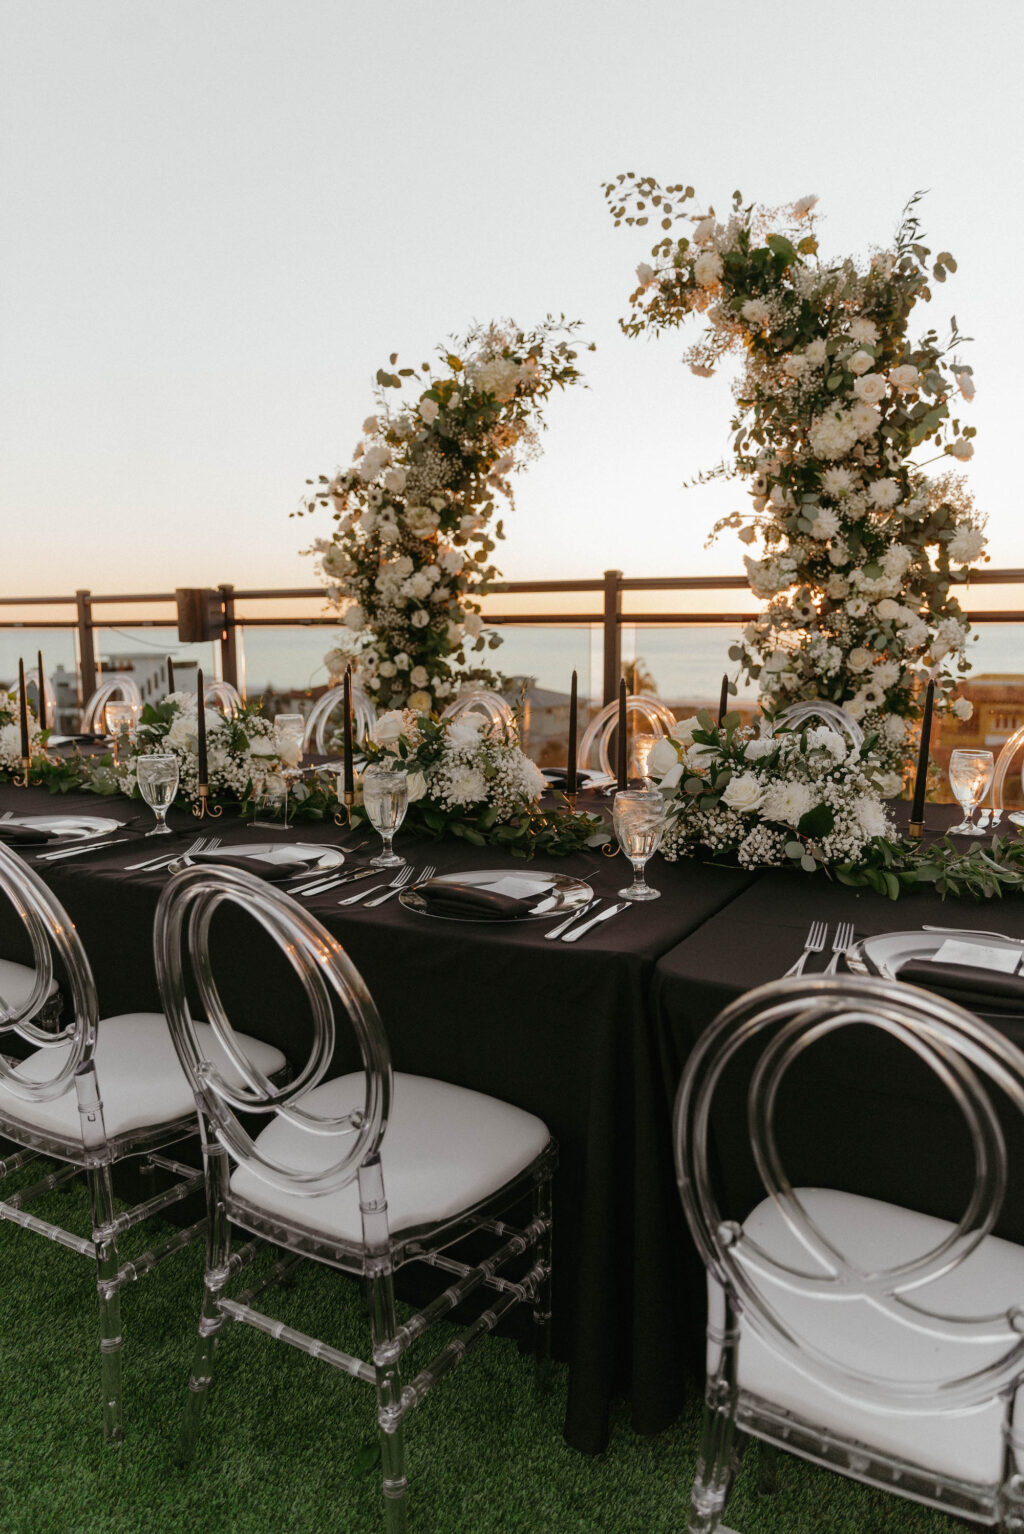 Infinity Ghost Chairs with Silver Flatware with White Florals and Greenery Reception Inspiration | St. Pete Beach Outside the Box Rental Linens | Florist Lemon Drops Weddings and Events